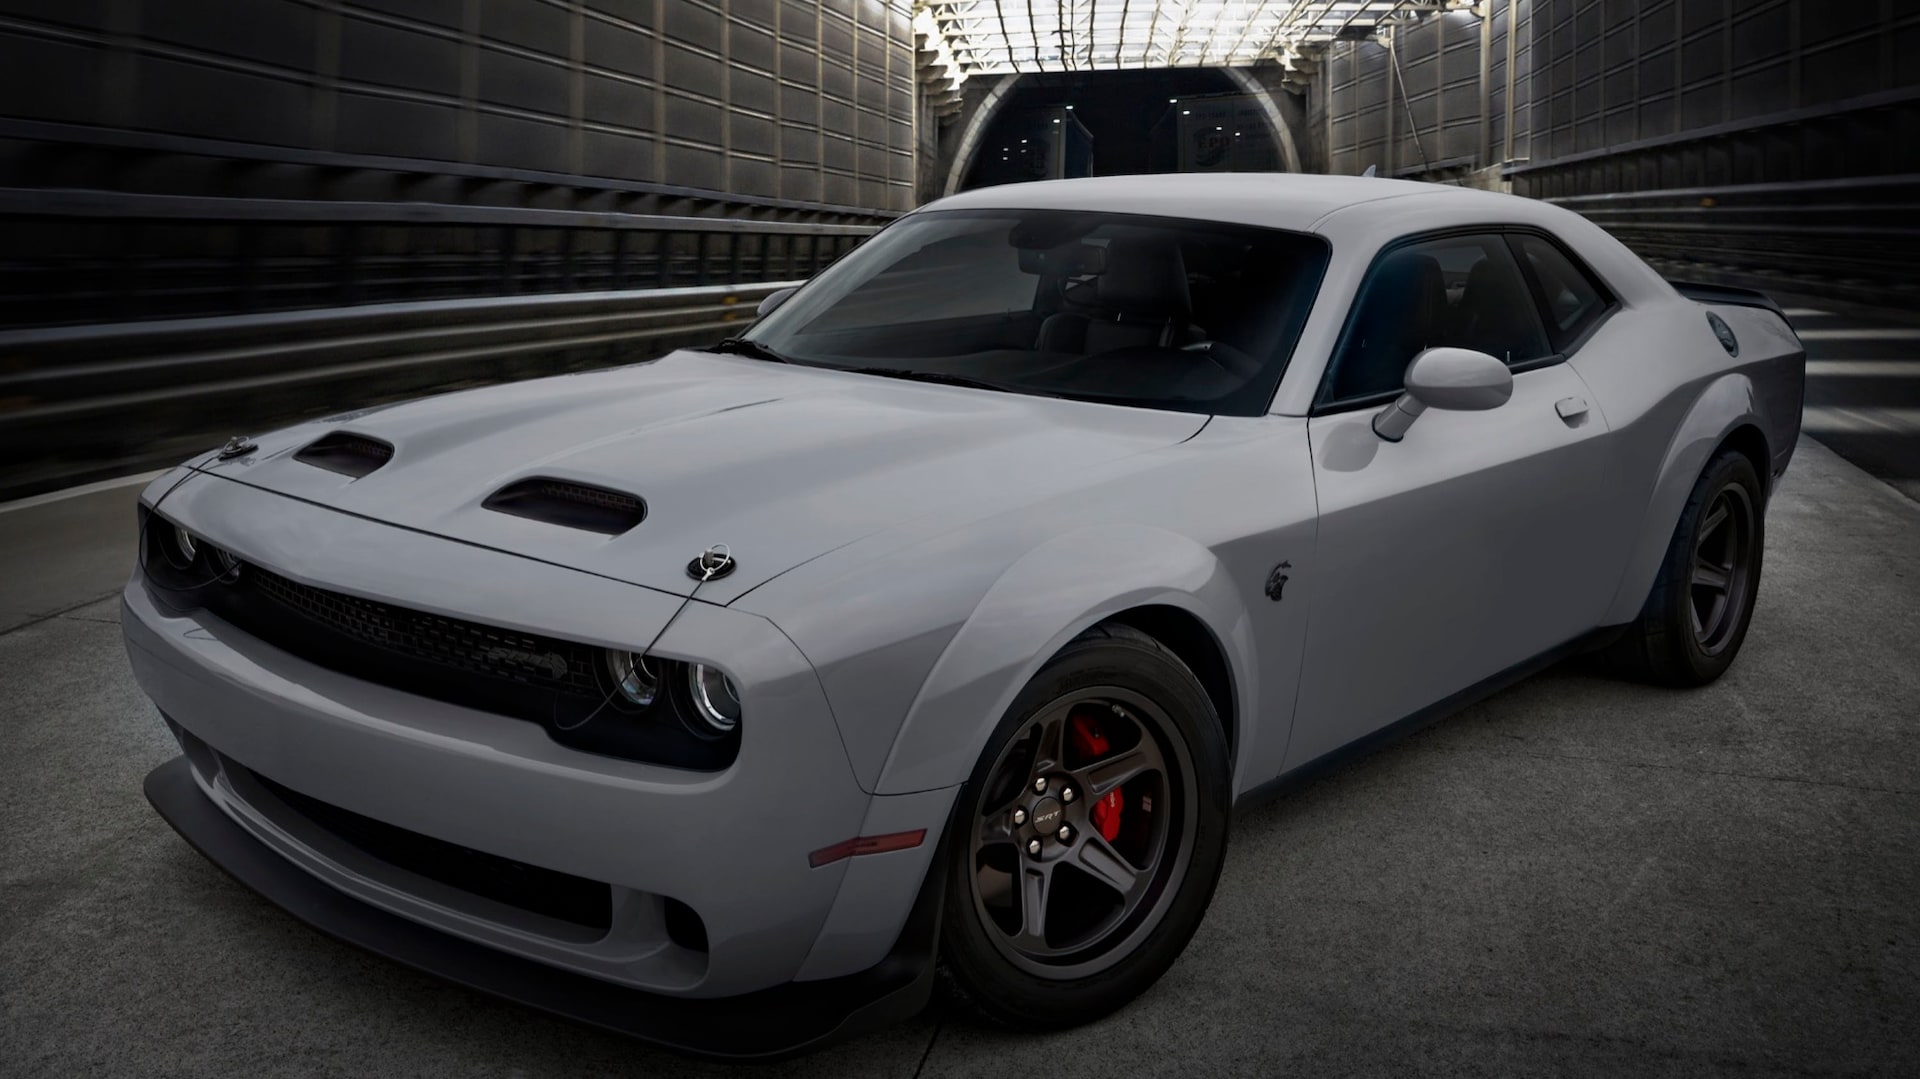 2023 Dodge Charger, Challenger Will Go Out in Blaze of Limited Edition Glory